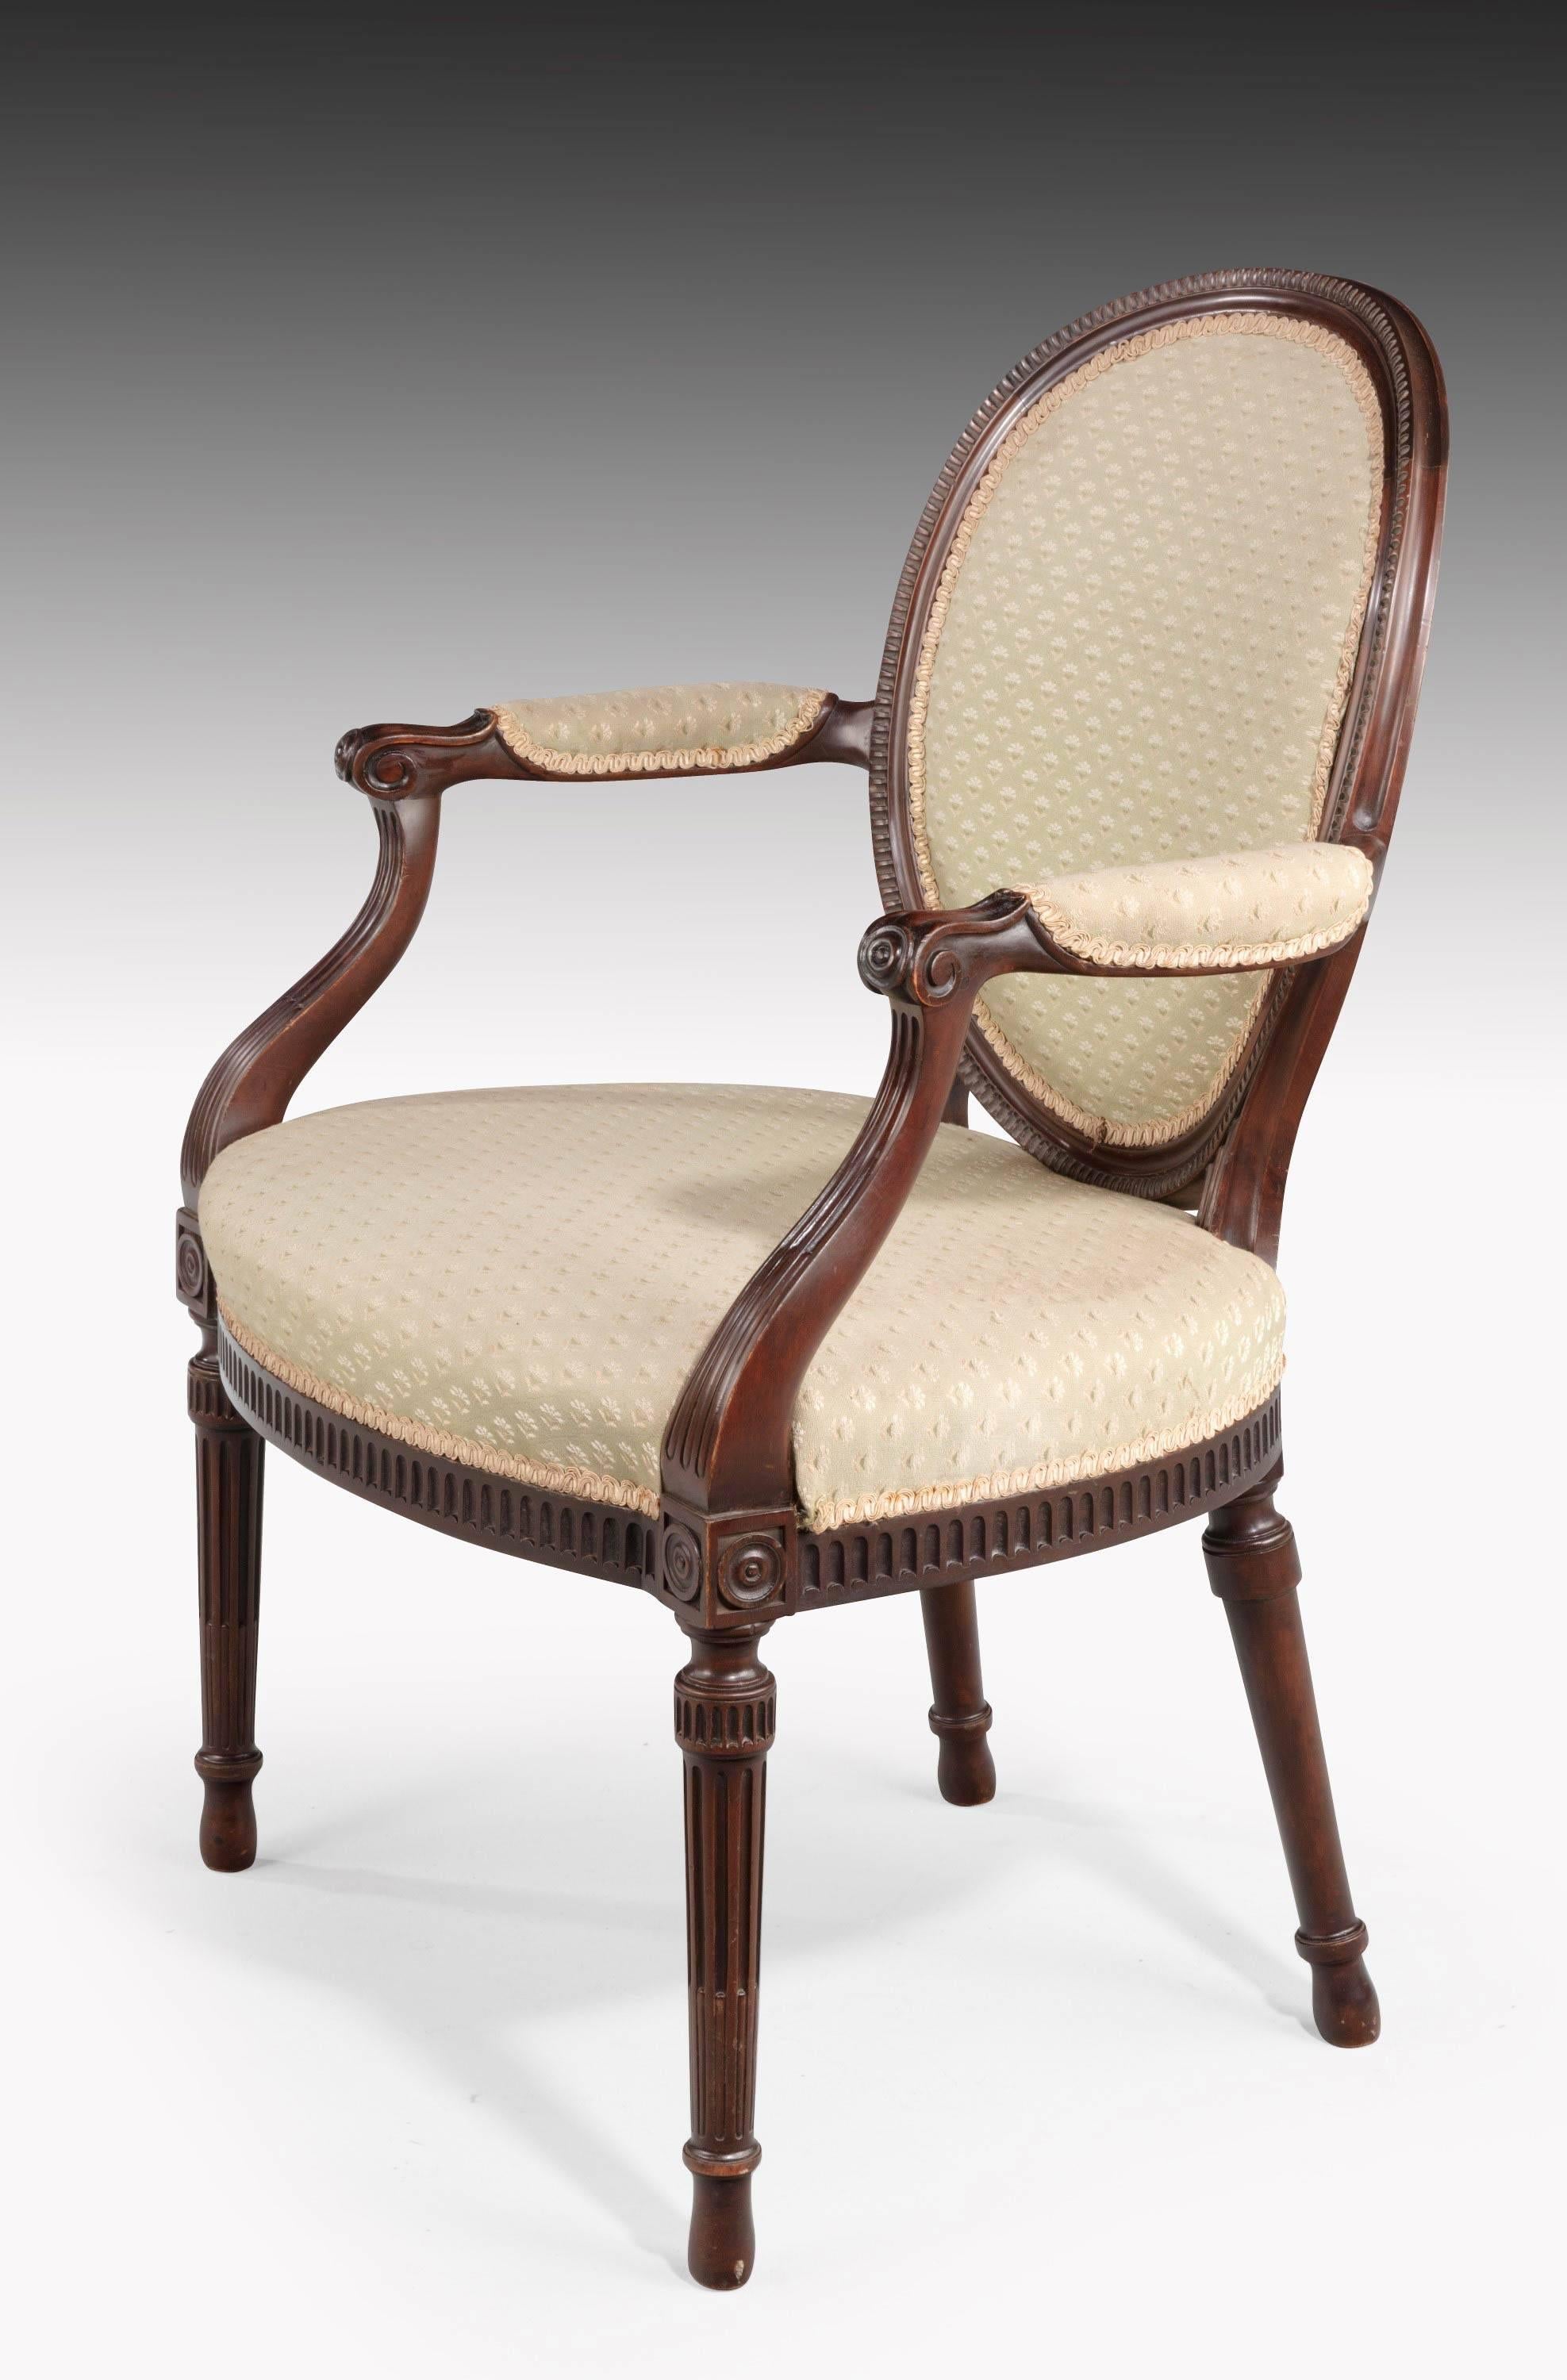 A pair of George III style Hepplewhite elbow chairs. The front rail with reeded incised decoration, the arms similarly carved. Very good overall condition. 

Measures: Seat height 17.5 inches.